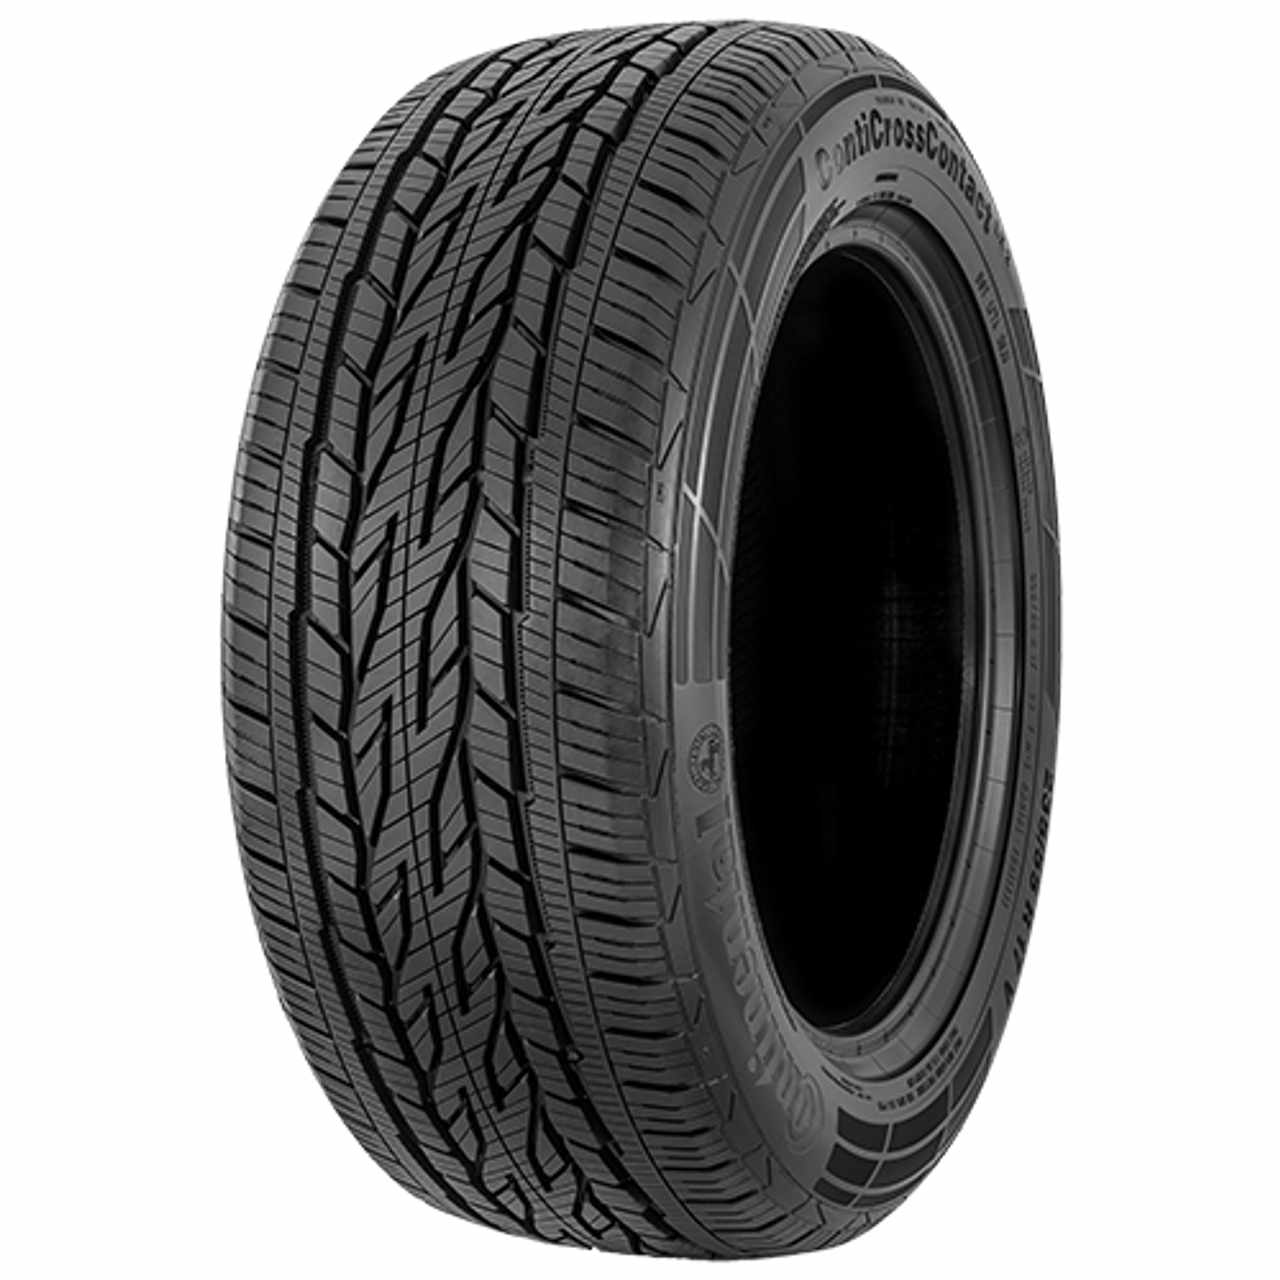 CONTINENTAL CONTICROSSCONTACT LX 2 (EVc) 255/70R16 111T FR BSW von Continental